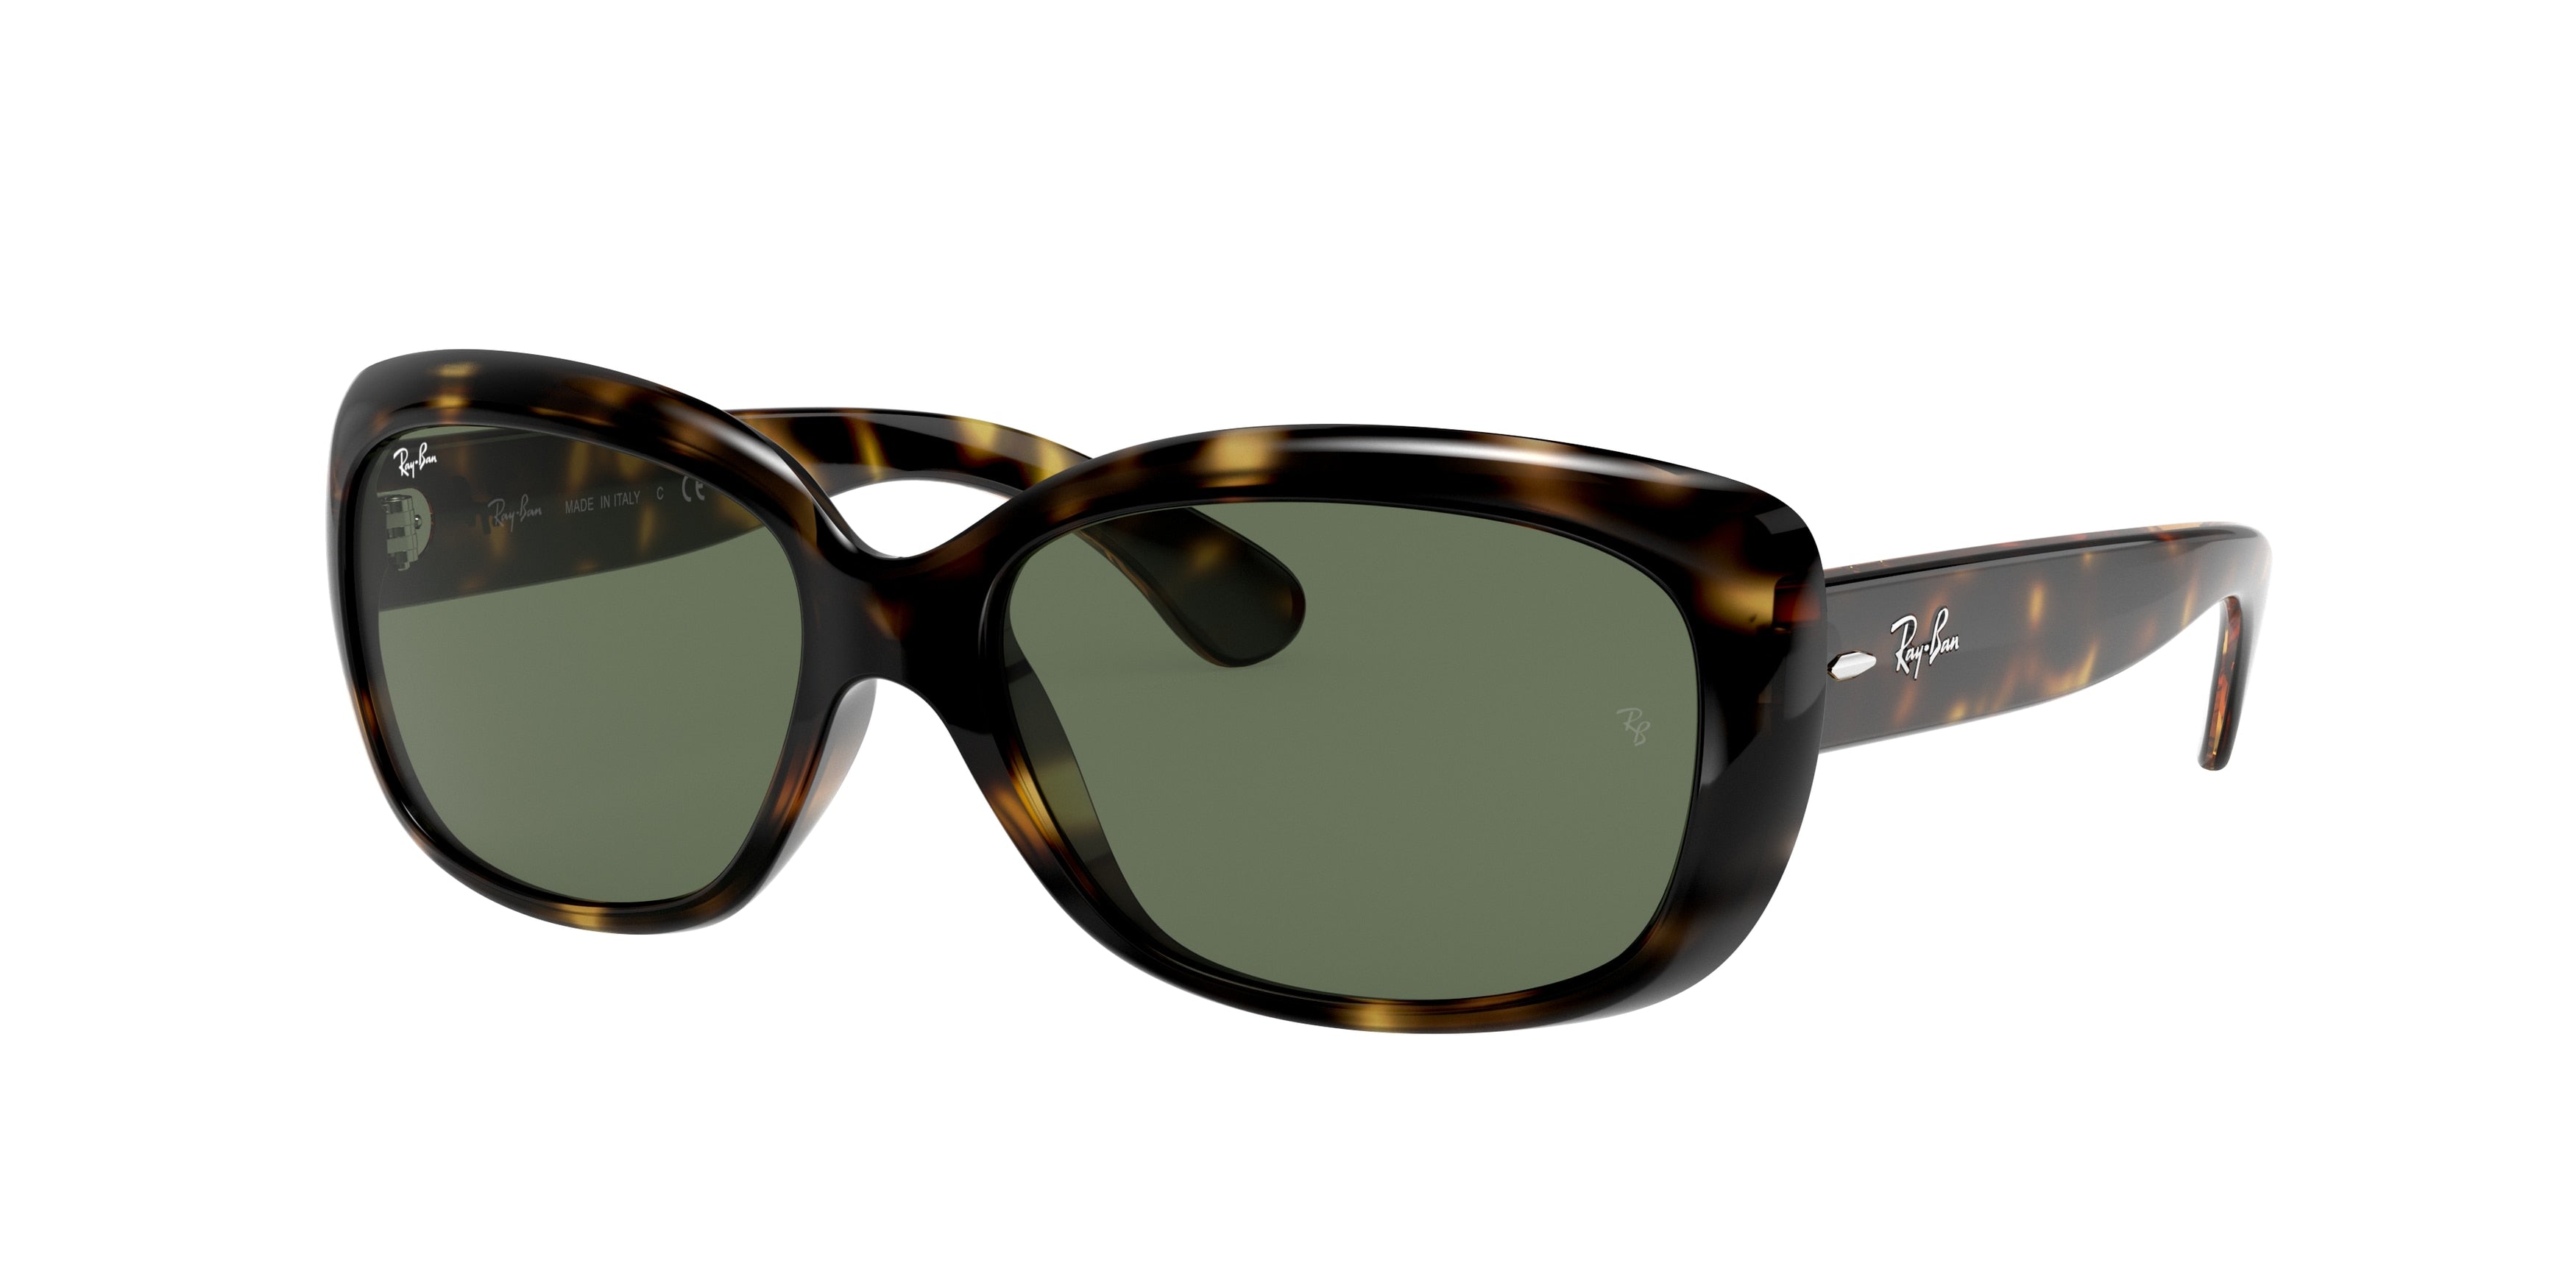 Ray-Ban JACKIE OHH RB4101 Butterfly Sunglasses  710-Light Havana 57-135-17 - Color Map Tortoise